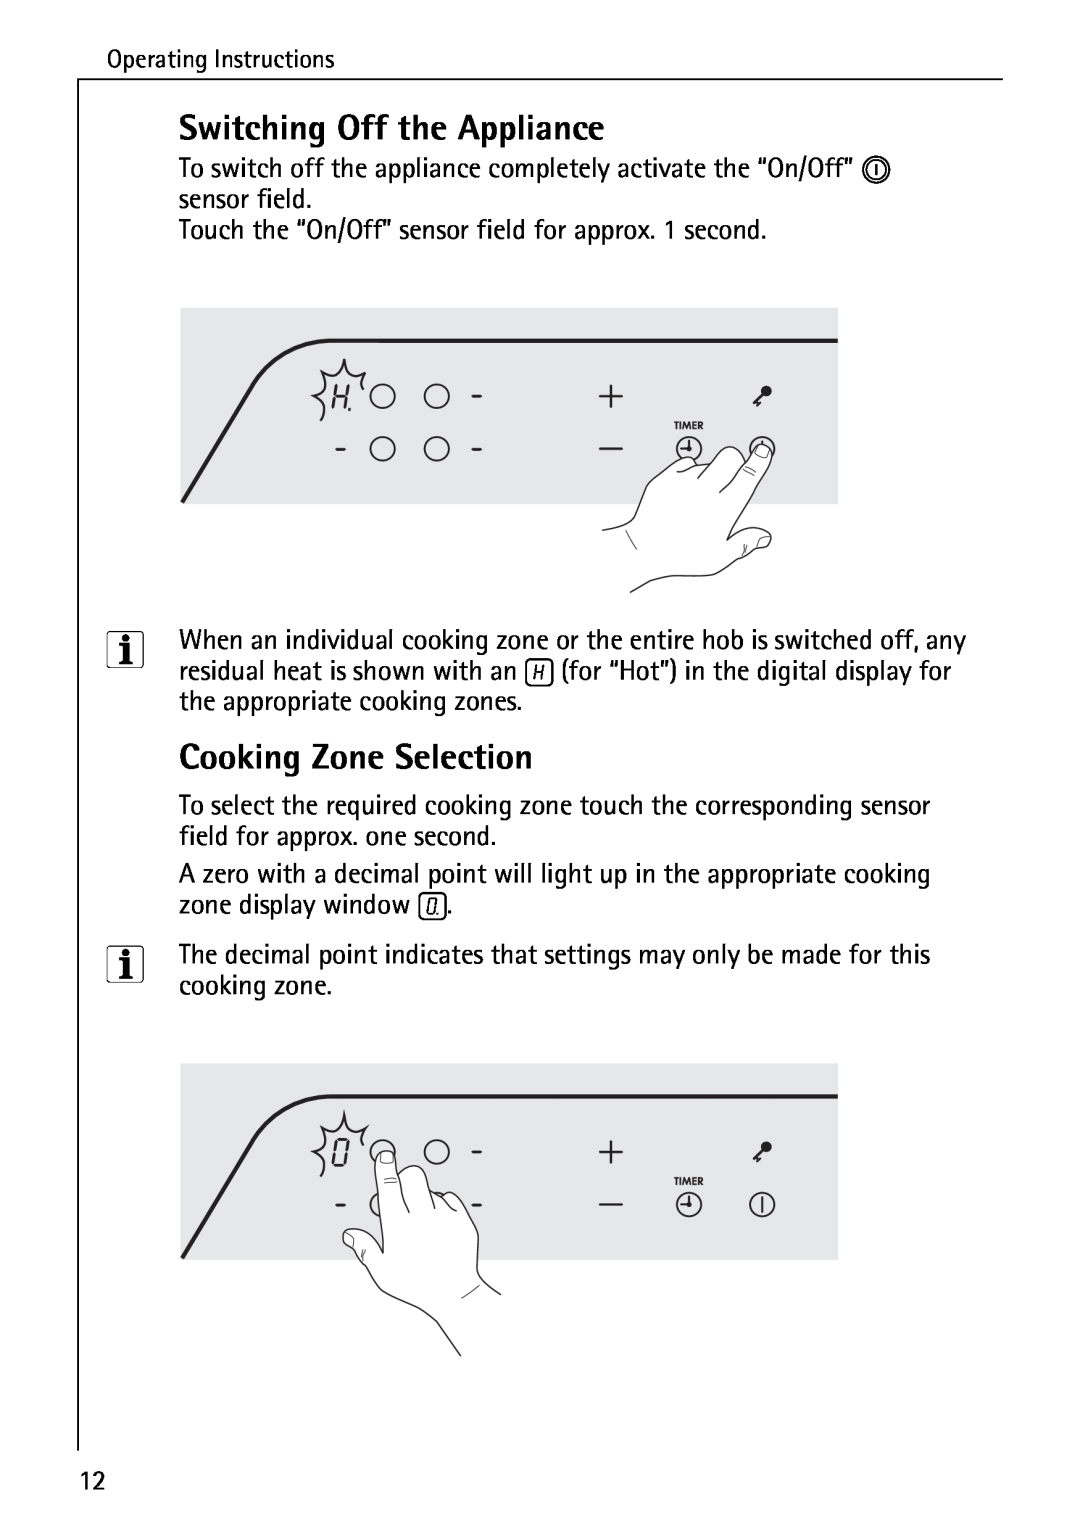 Electrolux C65030K operating instructions Switching Off the Appliance, Cooking Zone Selection 